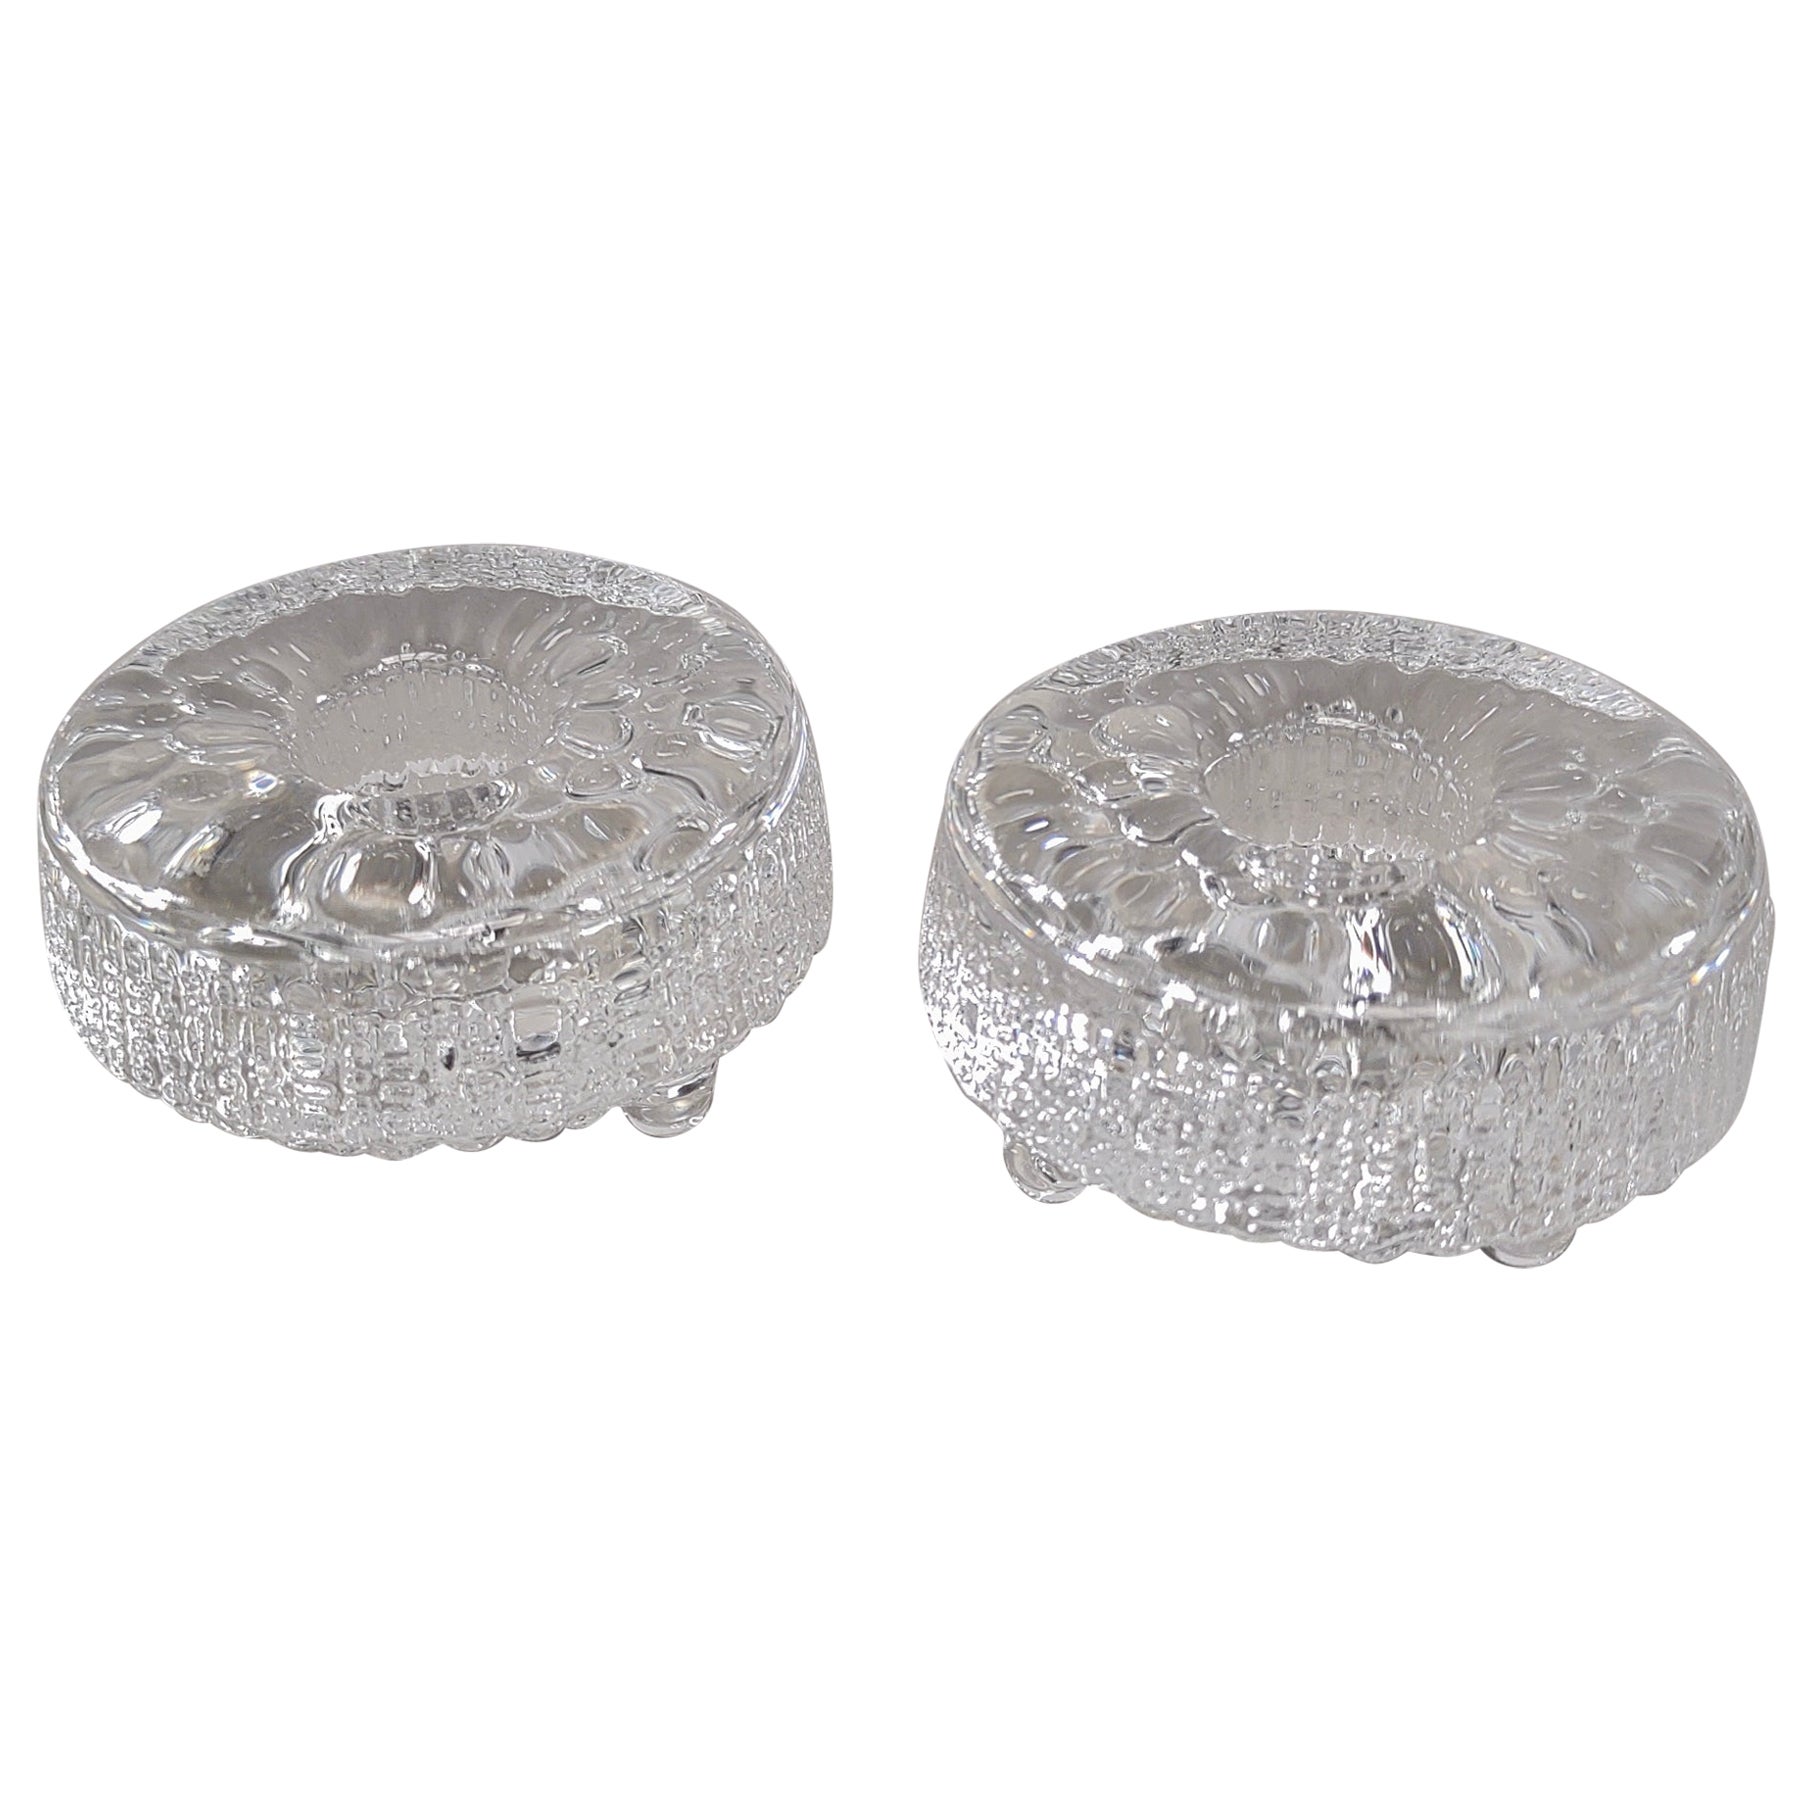 Pair of 'Ultima Thule' Glass Candle Holders by Tapio Wirkkala For Sale